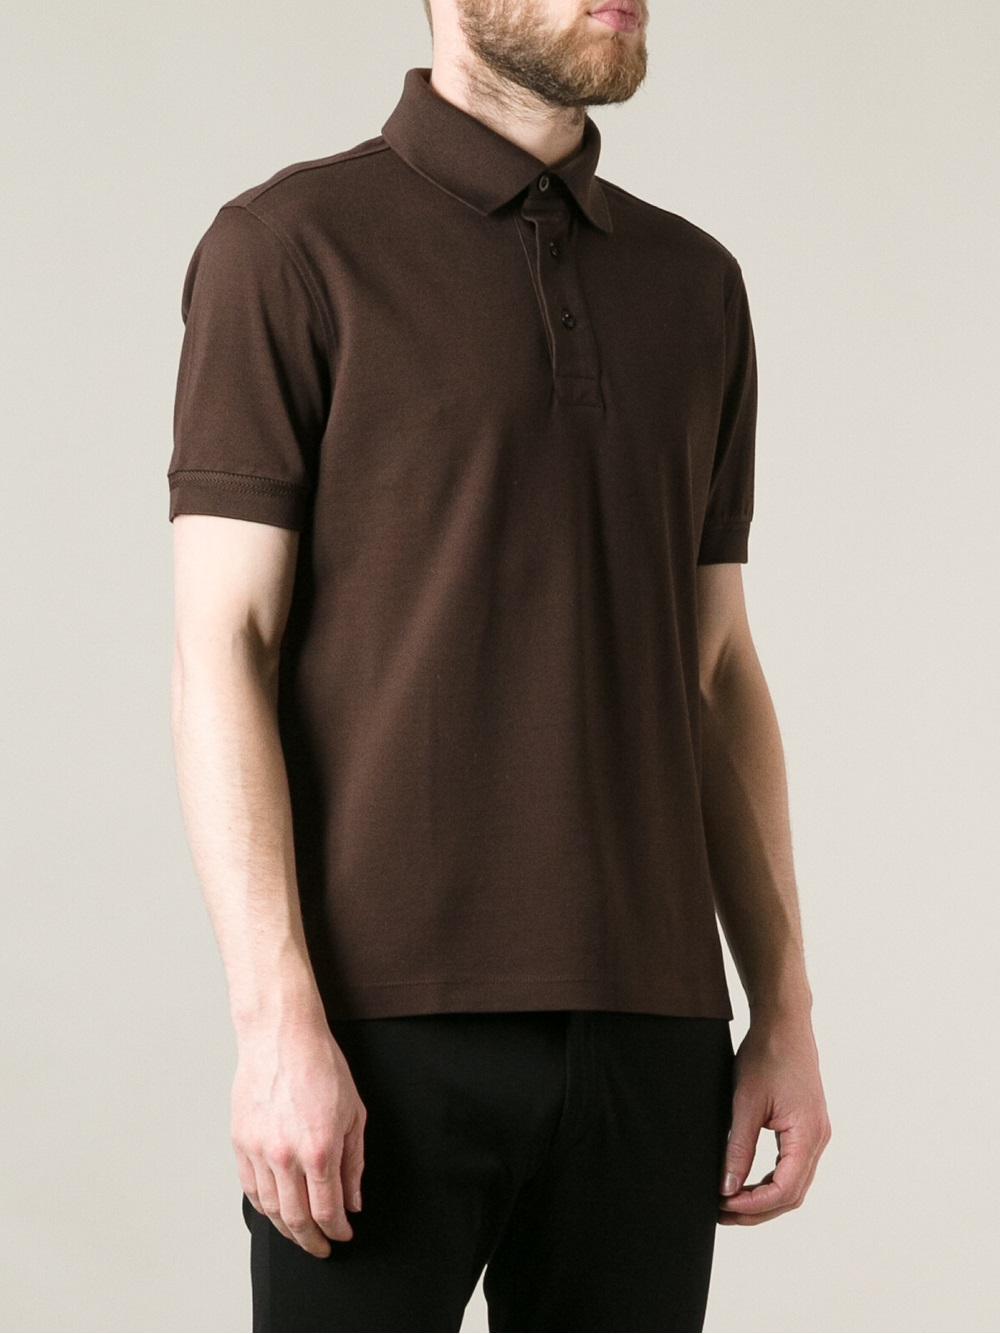 Tom Ford Classic Polo Shirt in Brown for Men - Lyst